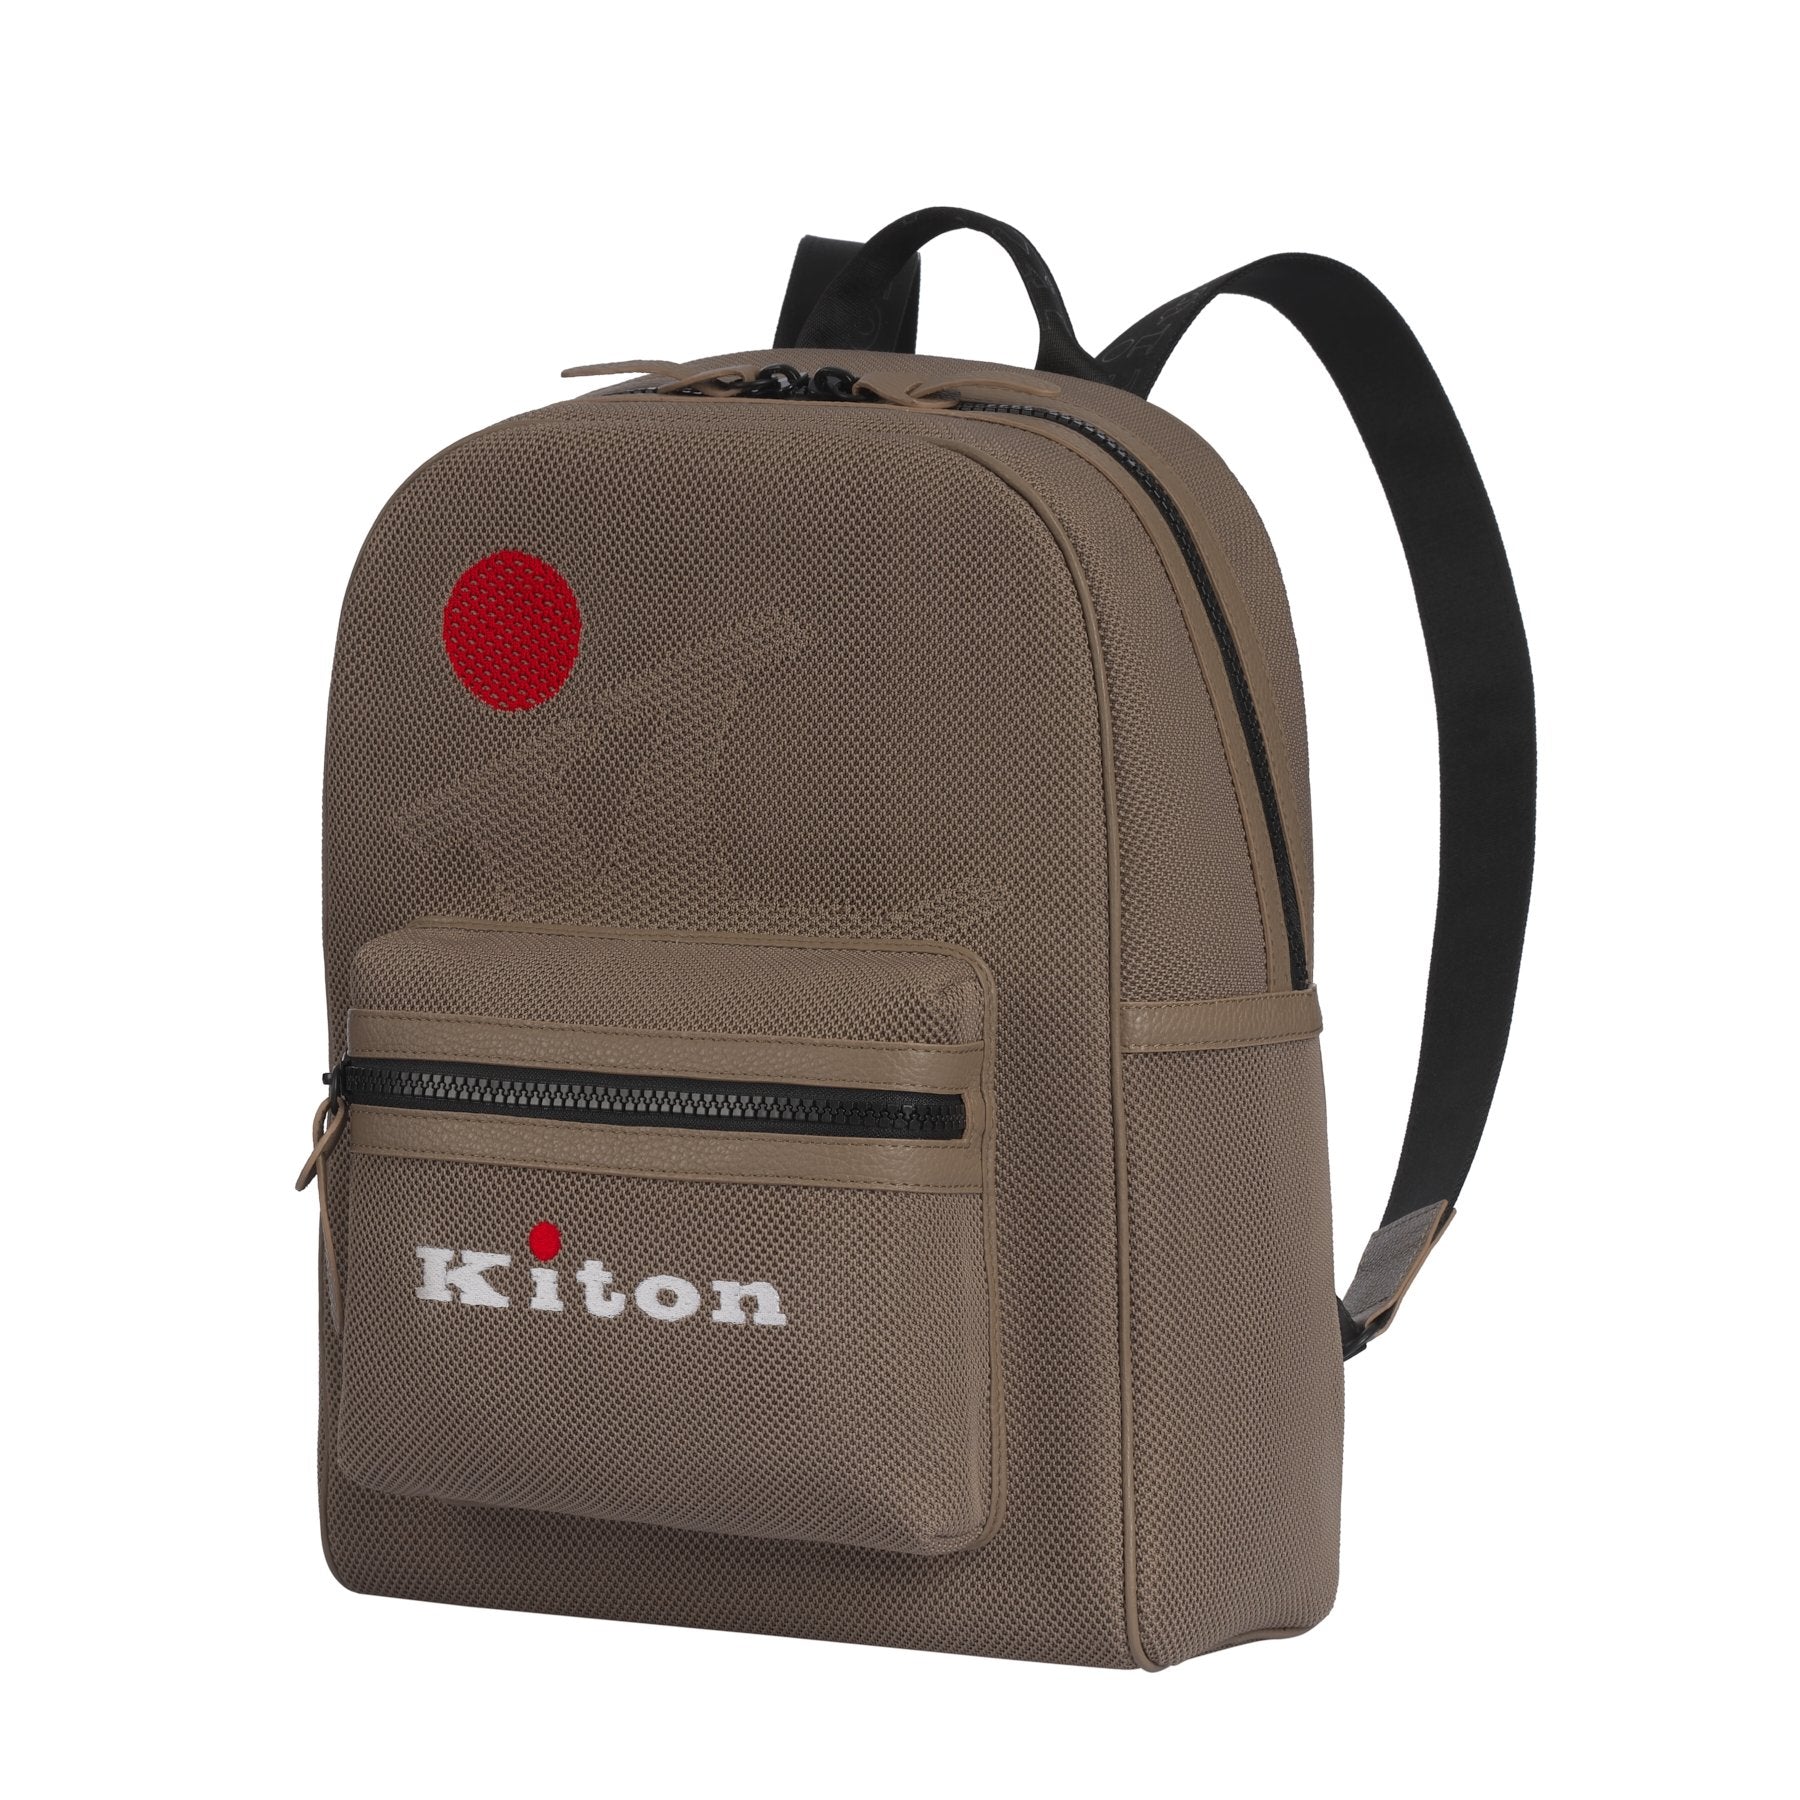 Logo-Embroidered Backpack in Khaki